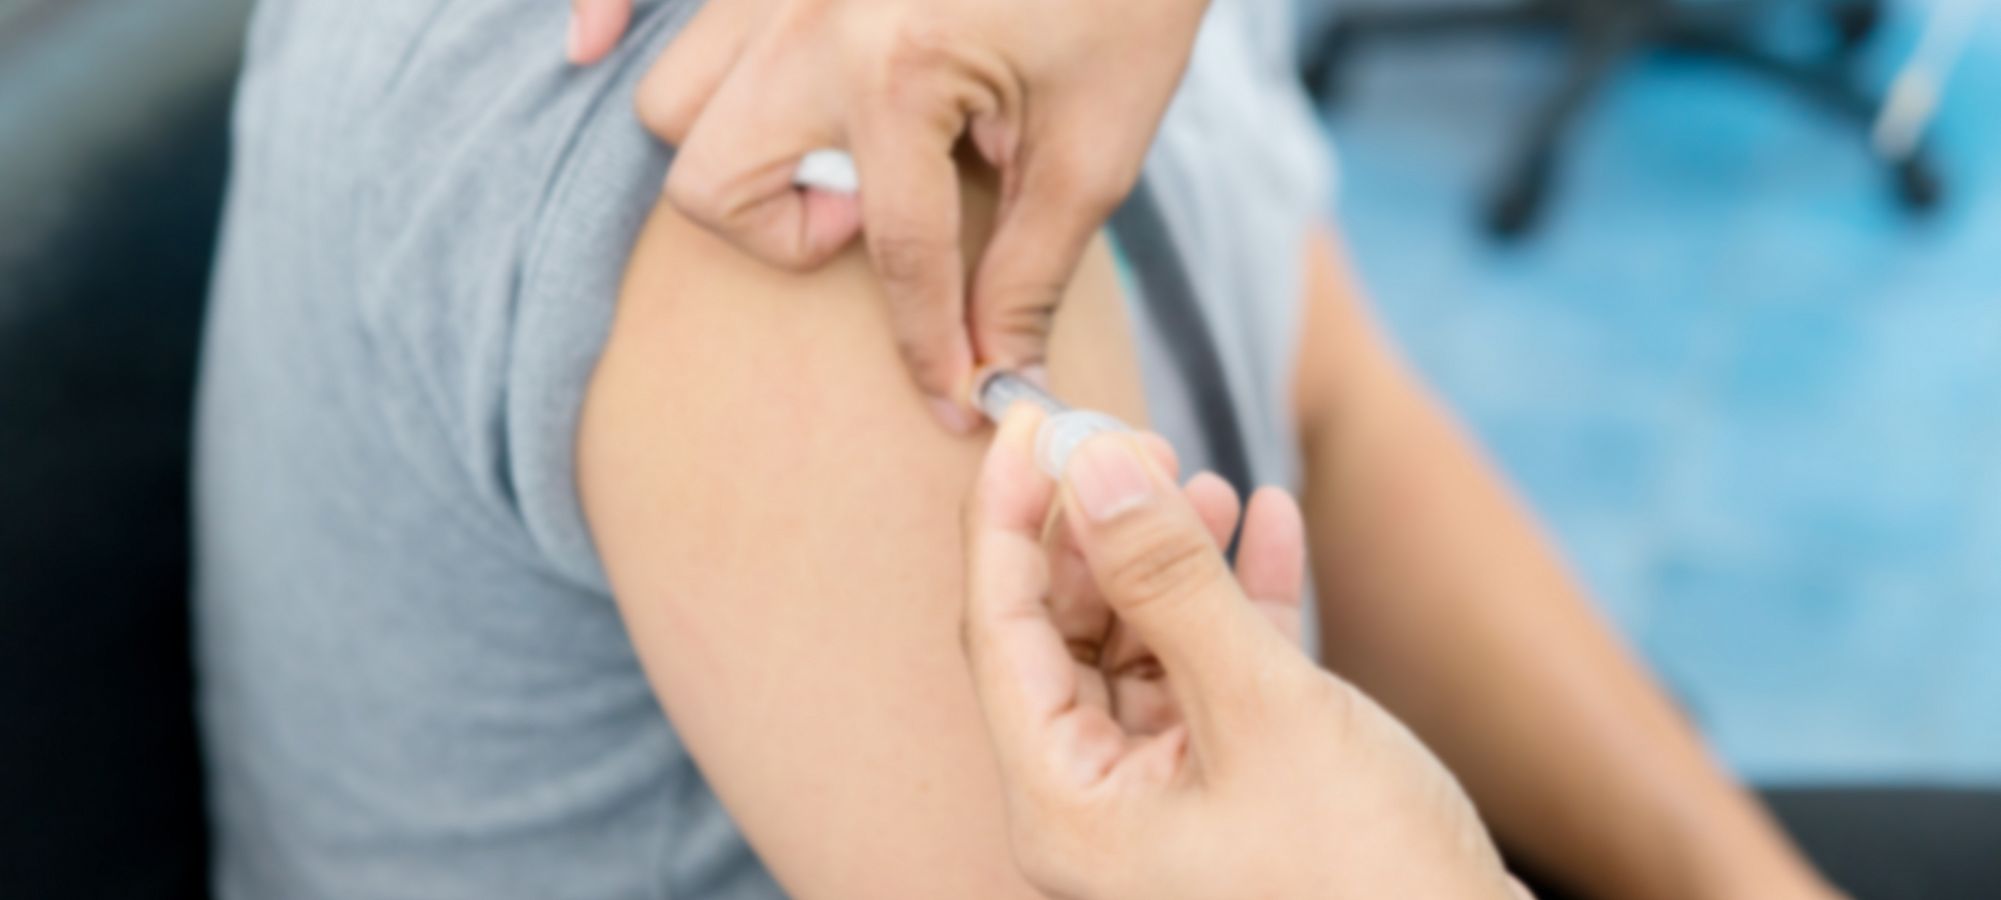 Flu shots available at Lakeside Medicine Centre in Kelowna